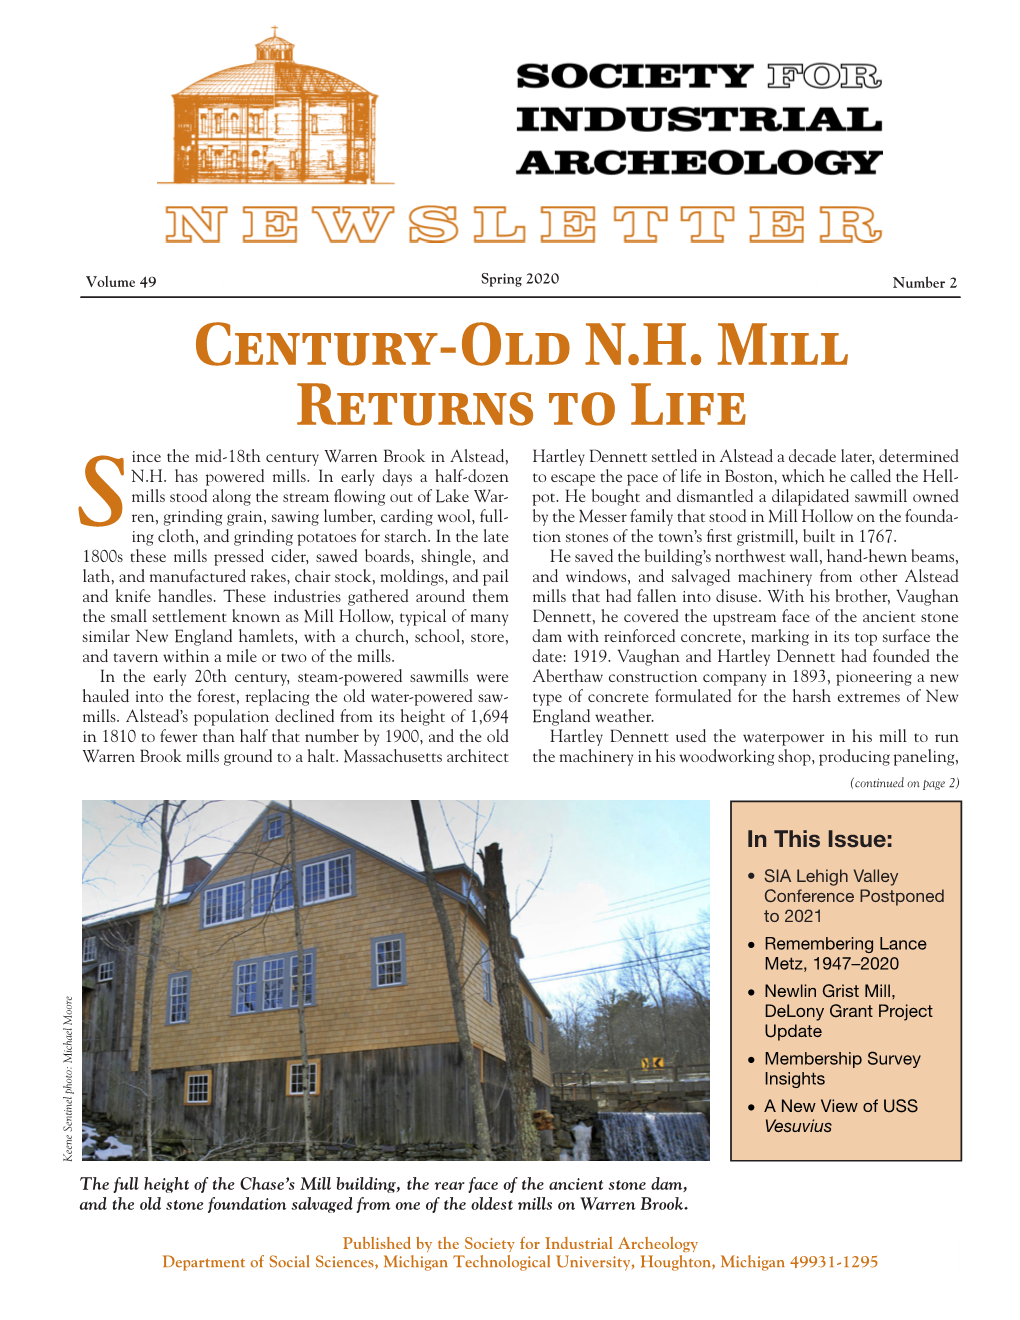 Century-Old N.H. Mill Returns to Life Ince the Mid-18Th Century Warren Brook in Alstead, Hartley Dennett Settled in Alstead a Decade Later, Determined N.H